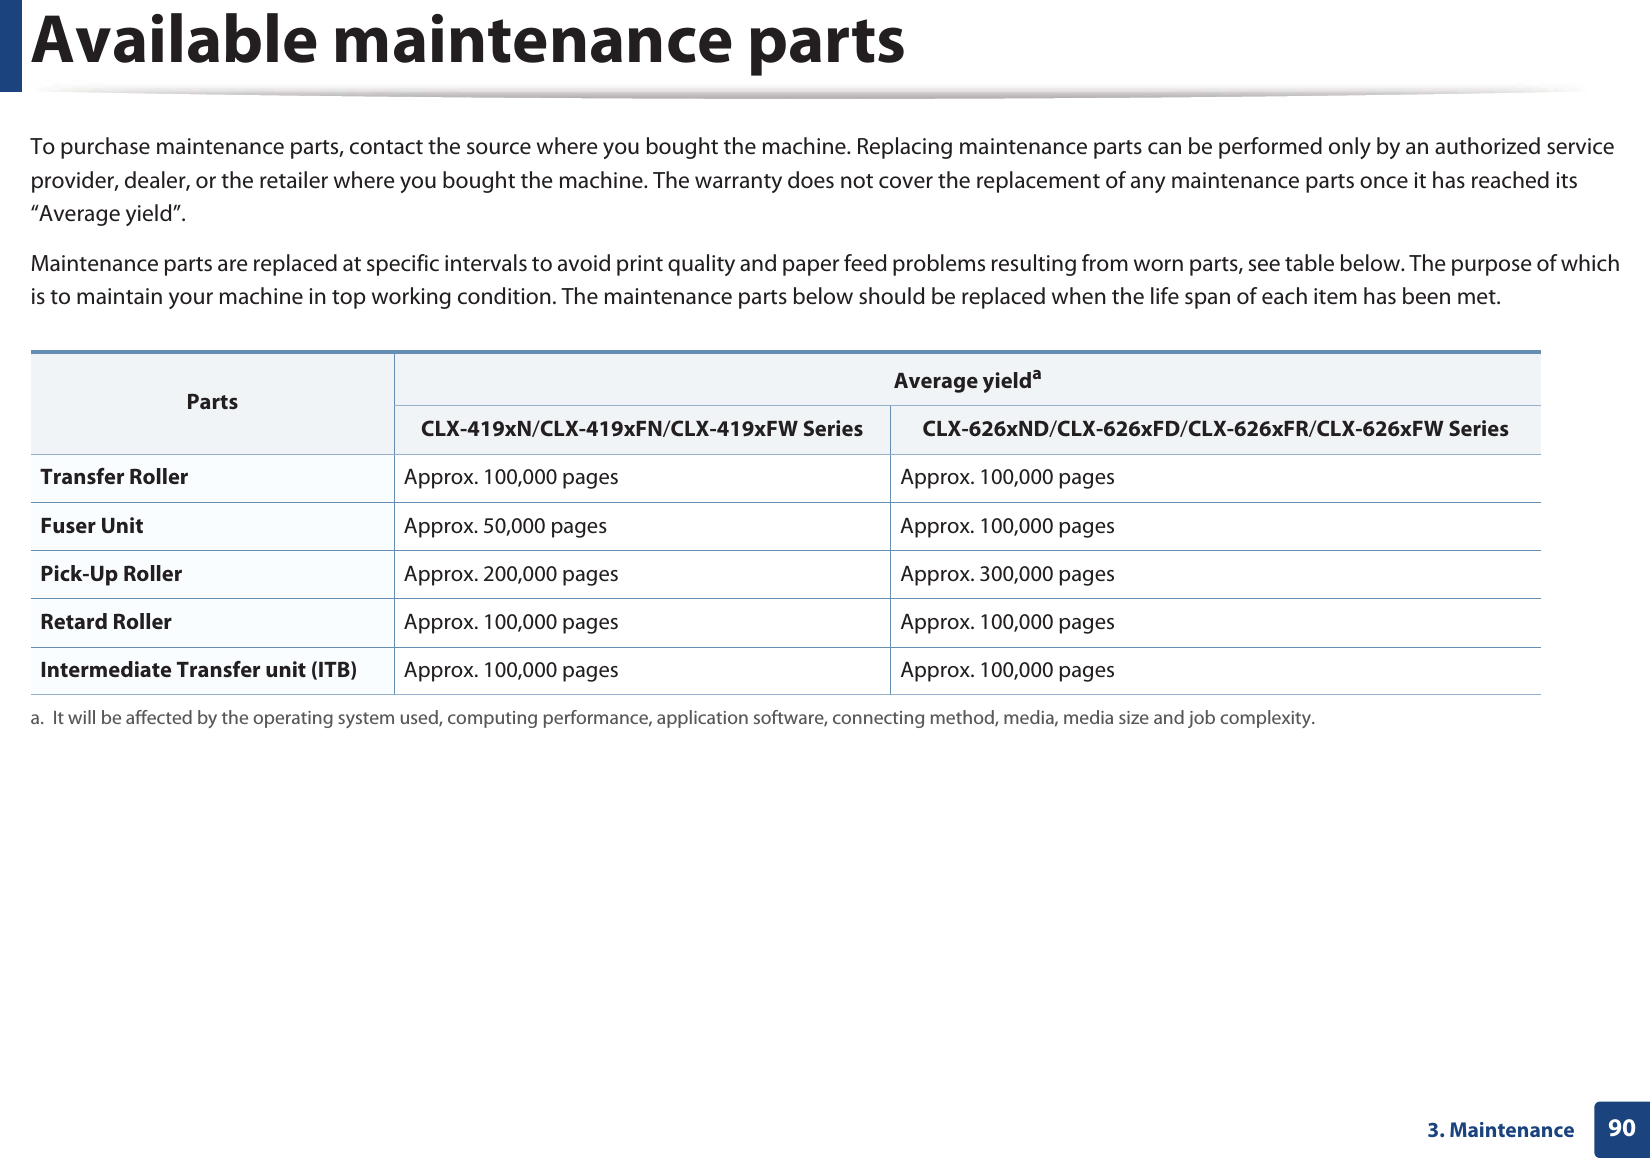 903. MaintenanceAvailable maintenance partsTo purchase maintenance parts, contact the source where you bought the machine. Replacing maintenance parts can be performed only by an authorized service provider, dealer, or the retailer where you bought the machine. The warranty does not cover the replacement of any maintenance parts once it has reached its “Average yield”.Maintenance parts are replaced at specific intervals to avoid print quality and paper feed problems resulting from worn parts, see table below. The purpose of which is to maintain your machine in top working condition. The maintenance parts below should be replaced when the life span of each item has been met.Parts Average yieldaa. It will be affected by the operating system used, computing performance, application software, connecting method, media, media size and job complexity.CLX-419xN/CLX-419xFN/CLX-419xFW Series CLX-626xND/CLX-626xFD/CLX-626xFR/CLX-626xFW SeriesTransfer Roller Approx. 100,000 pages Approx. 100,000 pagesFuser Unit Approx. 50,000 pages Approx. 100,000 pagesPick-Up Roller Approx. 200,000 pages Approx. 300,000 pagesRetard Roller Approx. 100,000 pages Approx. 100,000 pagesIntermediate Transfer unit (ITB) Approx. 100,000 pages Approx. 100,000 pages